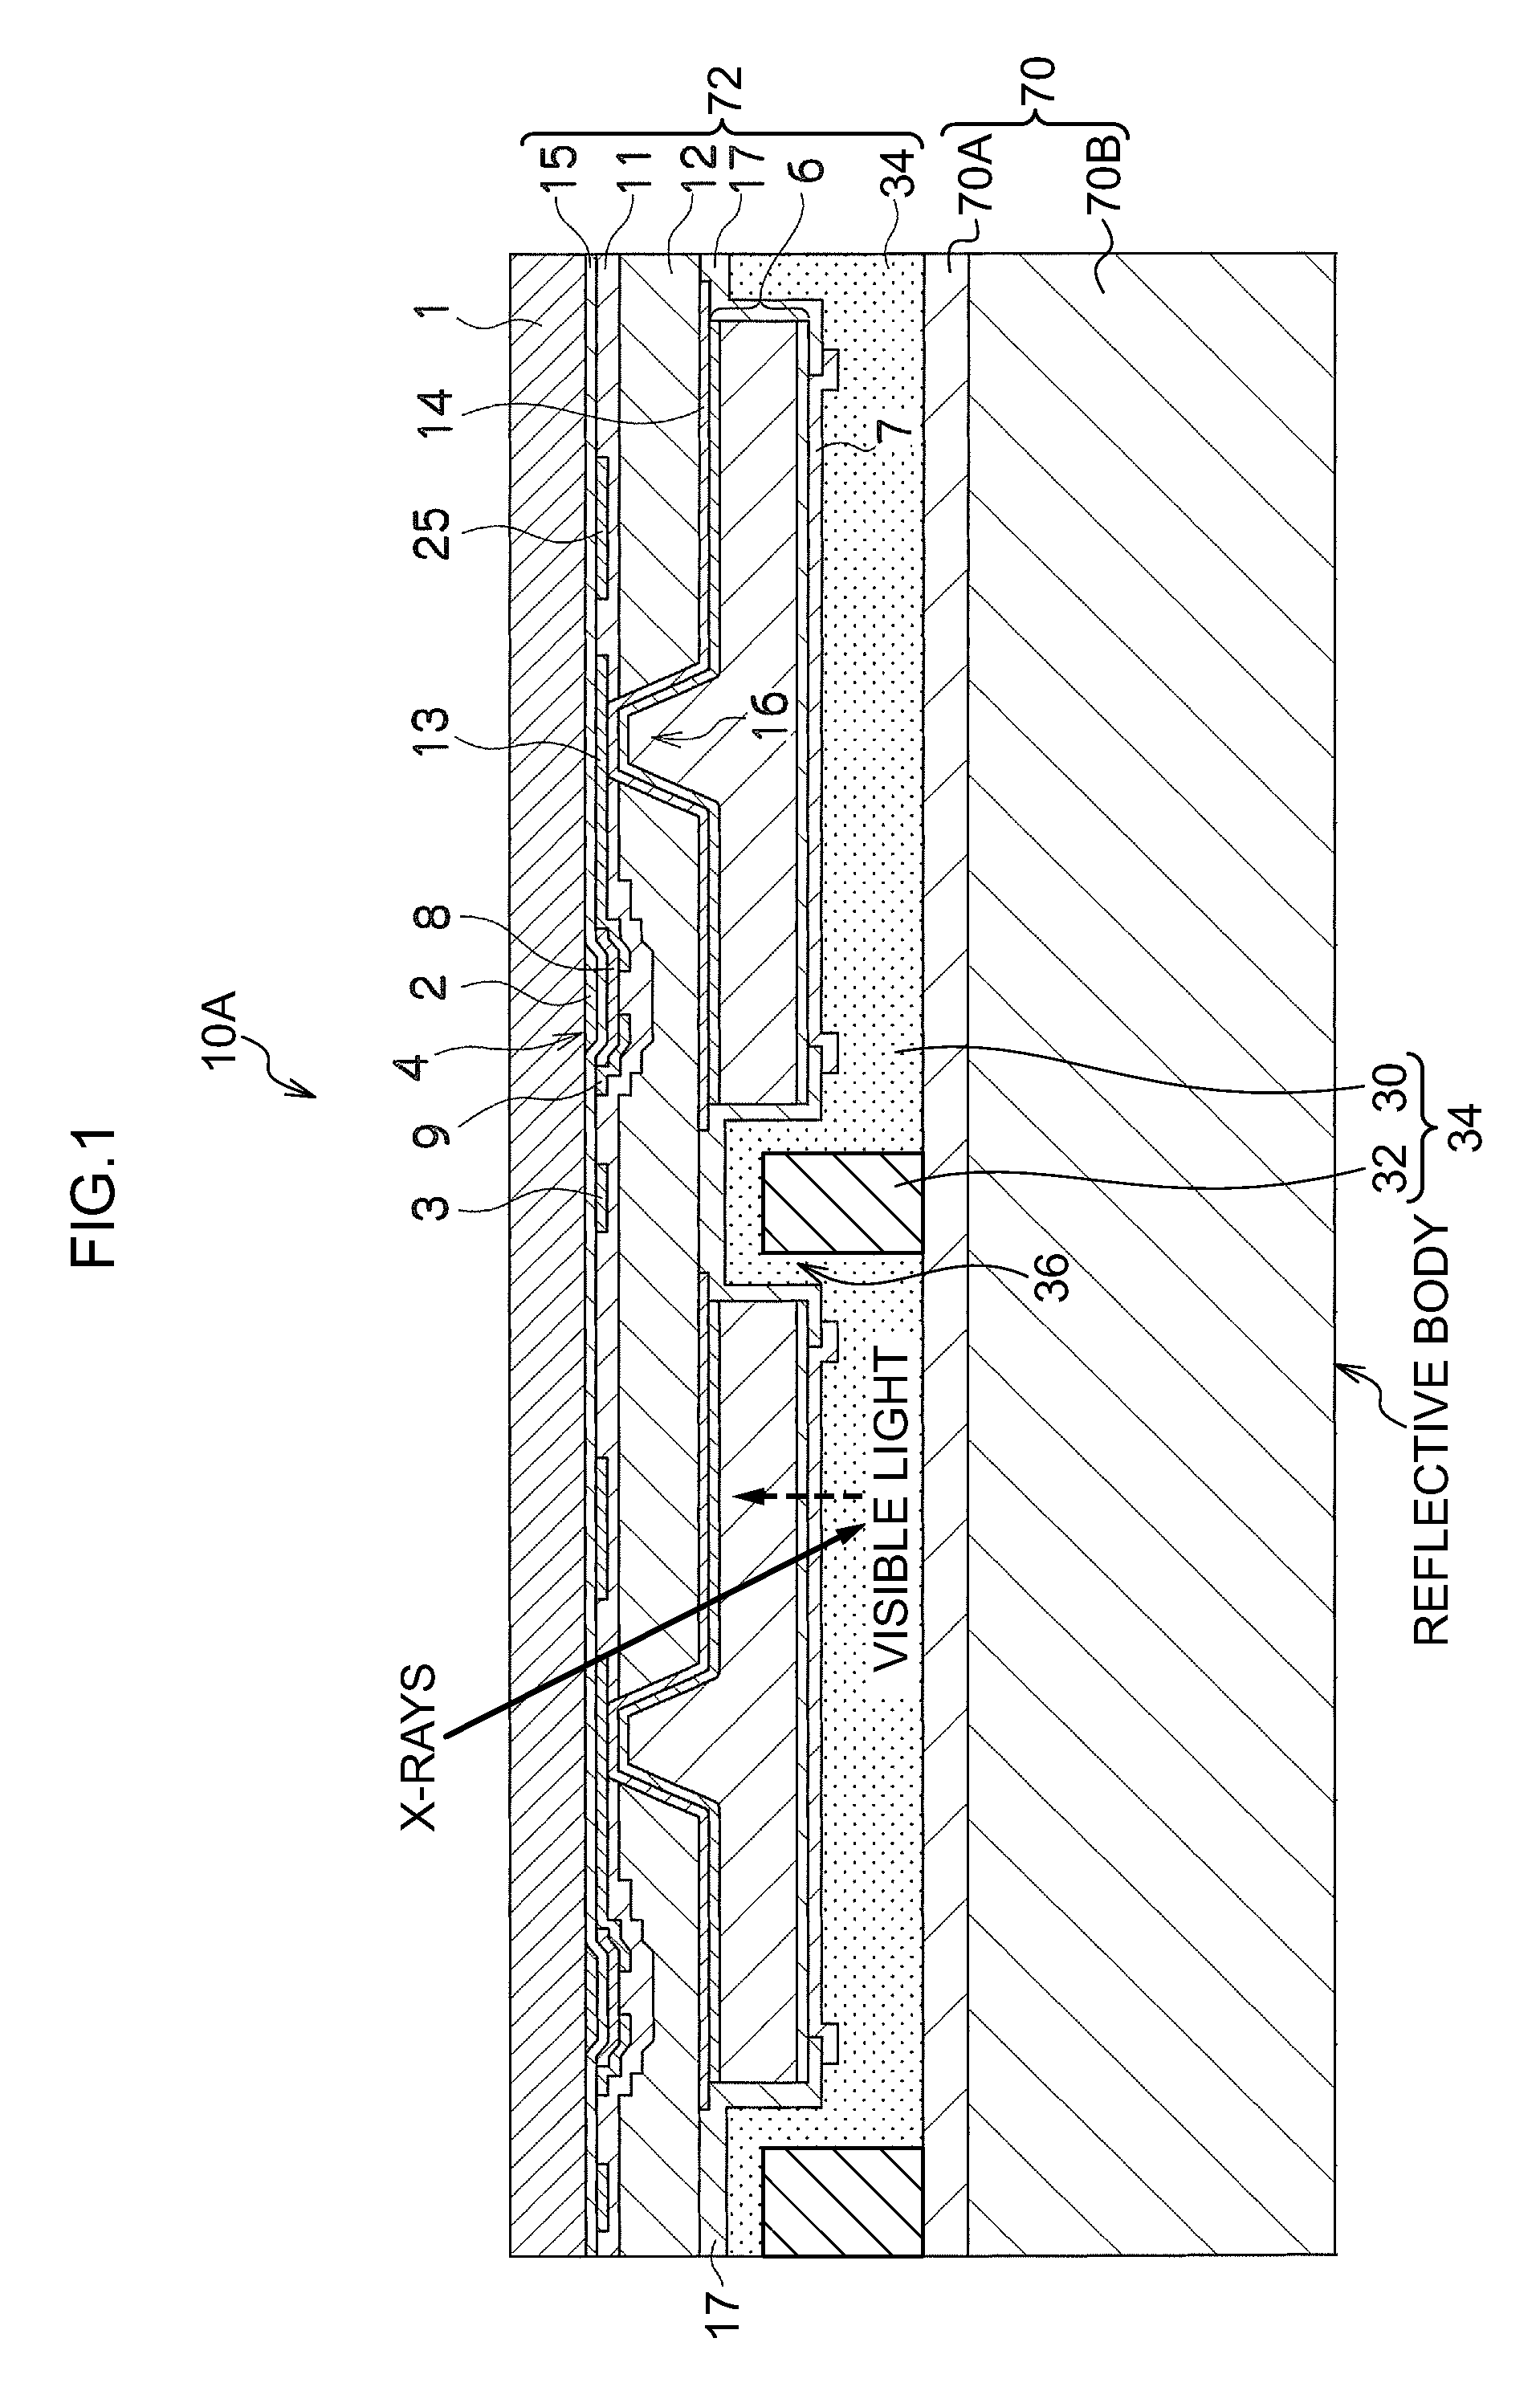 Radiation detector, radiation detector fabrication method, and radiographic image capture device